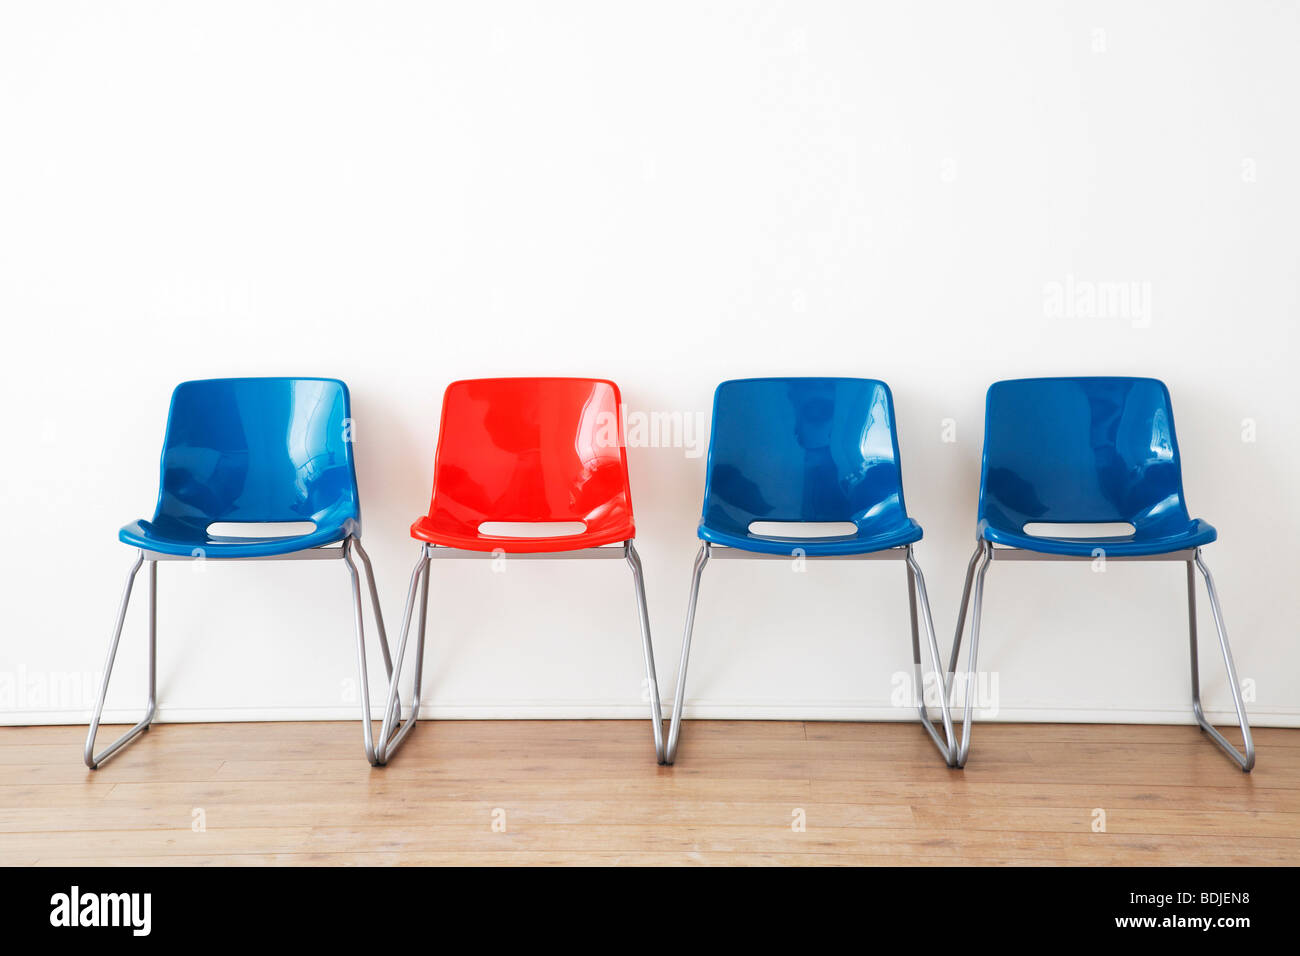 Row of Red and Blue Chairs in Waiting Room Stock Photo